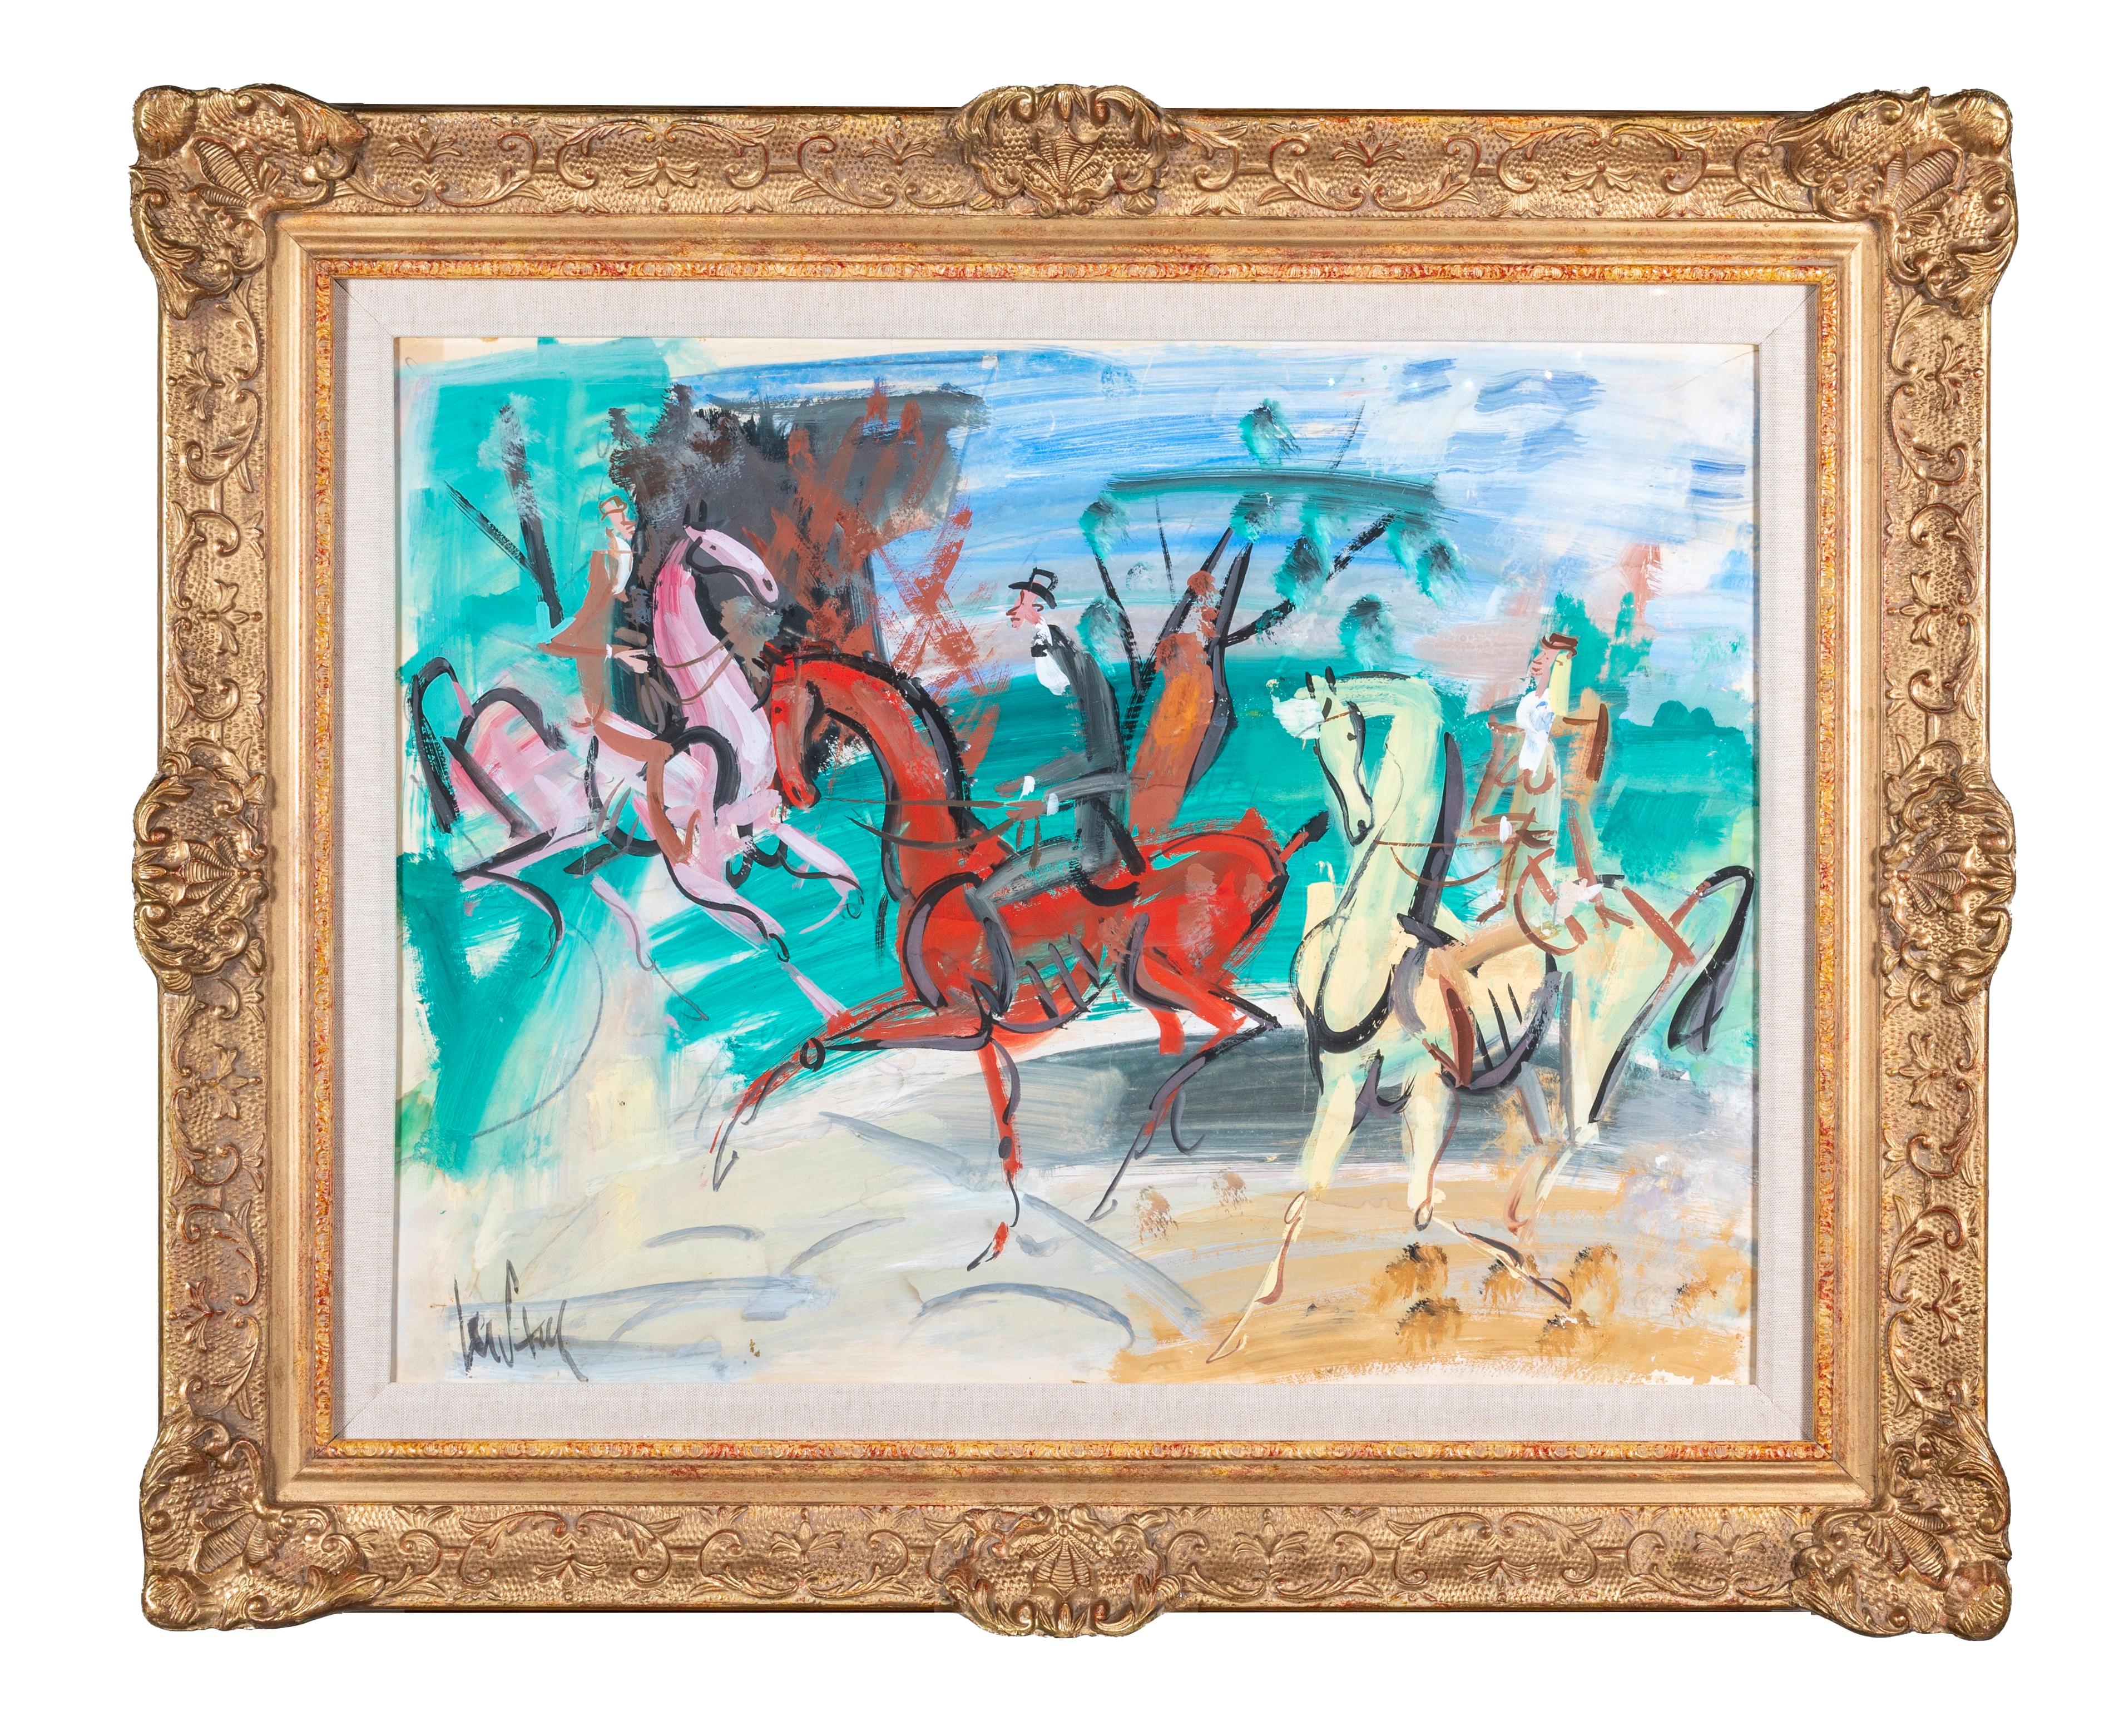 GEN PAUL Abstract Painting - 'The Promenade' Abstract Figurative painting of horses and figures, red, green